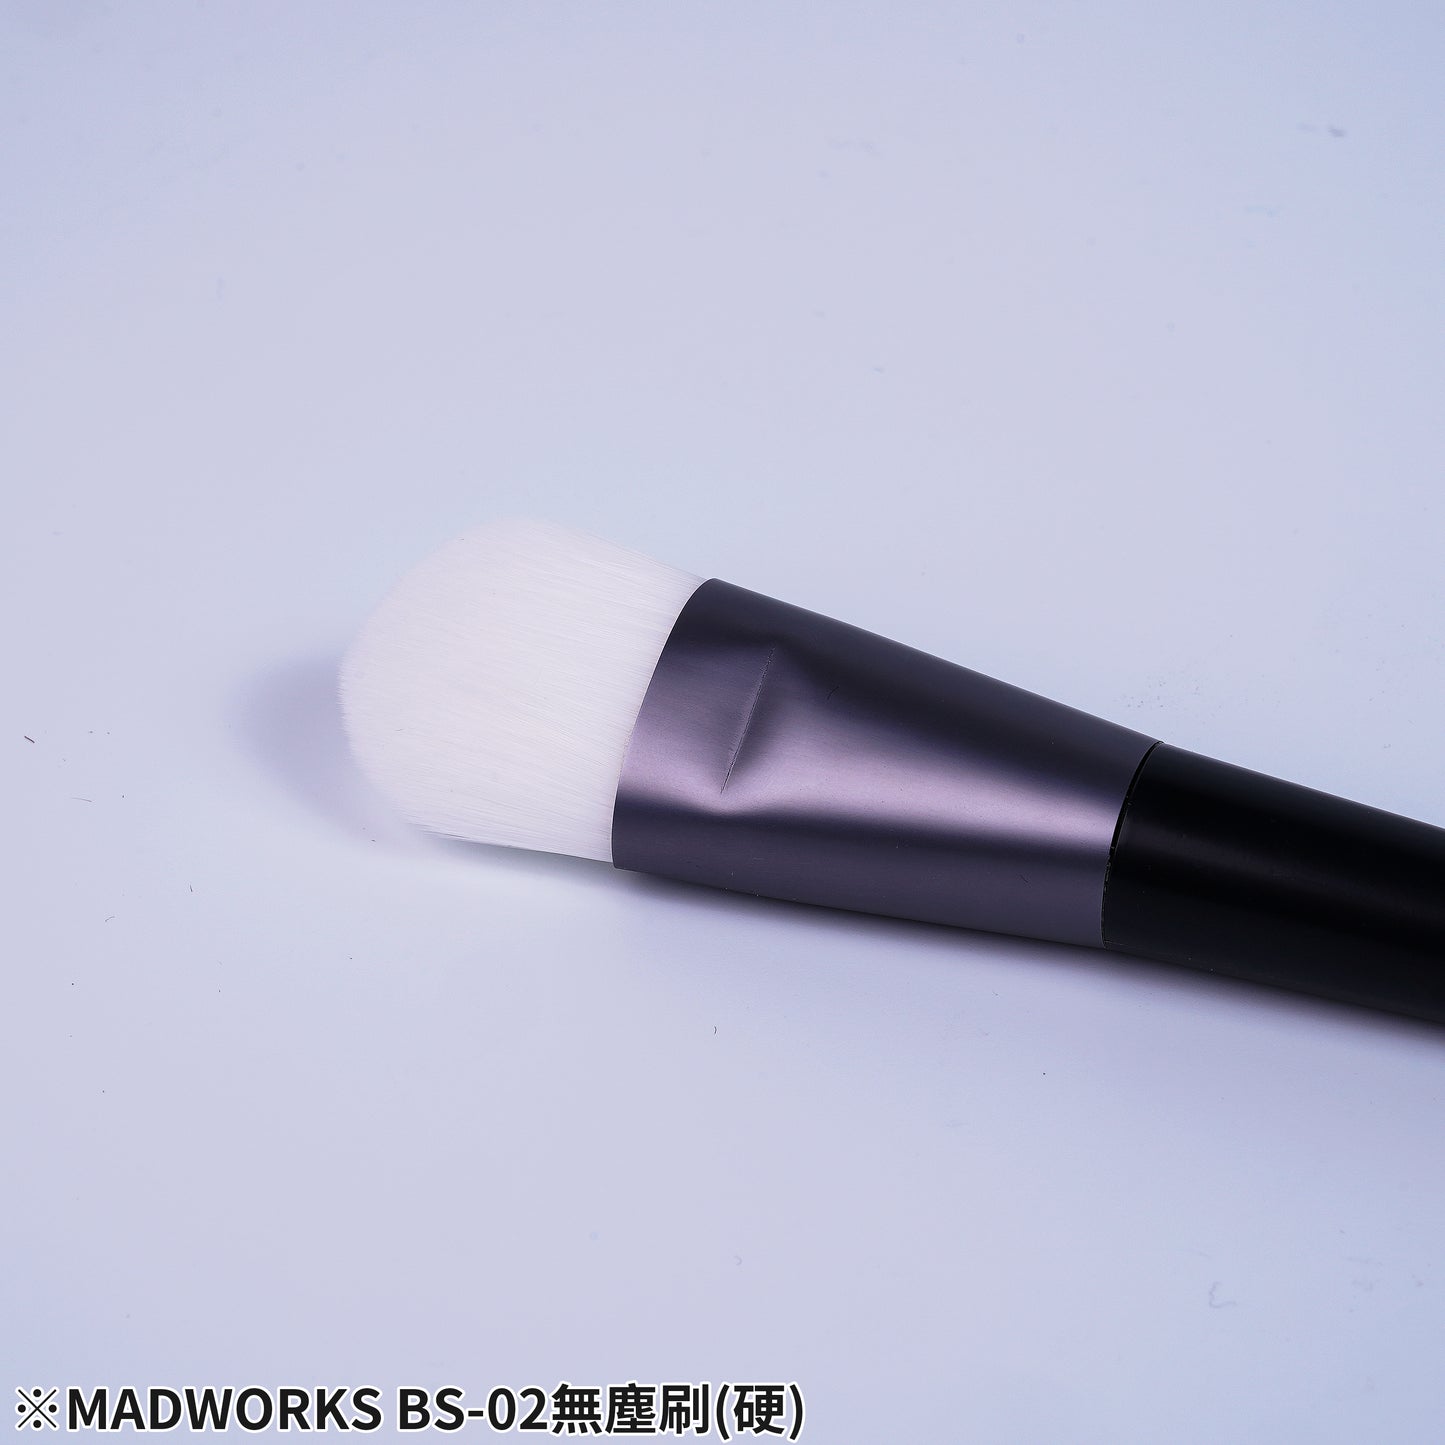 Madworks BS-02 MODEL CLEANING BRUSH (FIRM)